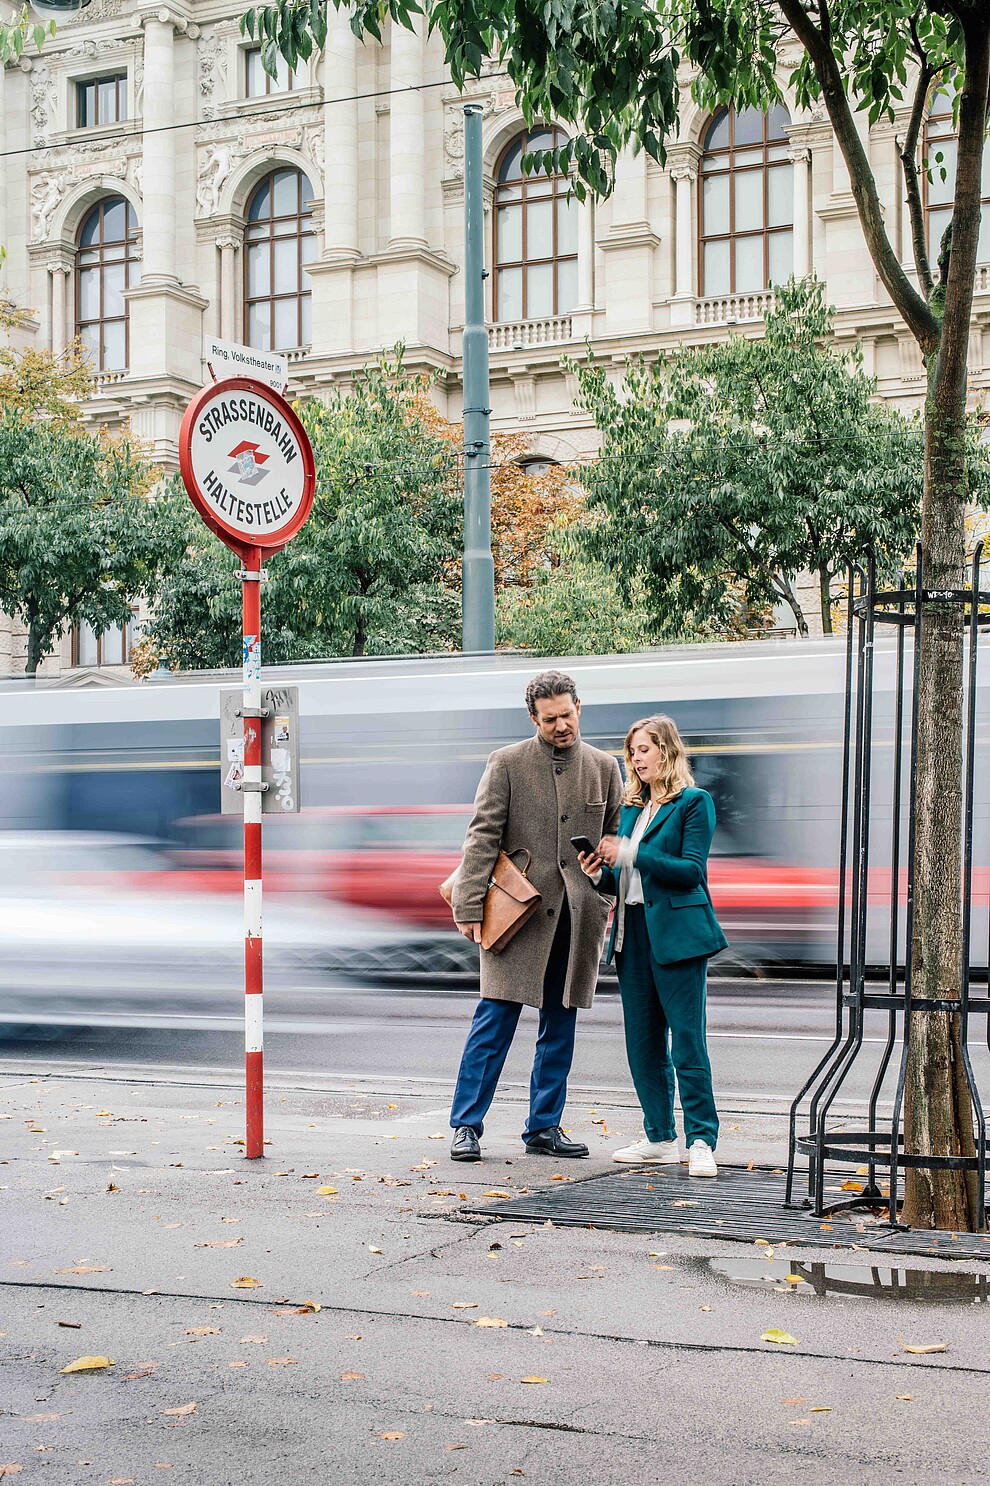 Man and woman standing at the street while tram is passing by 